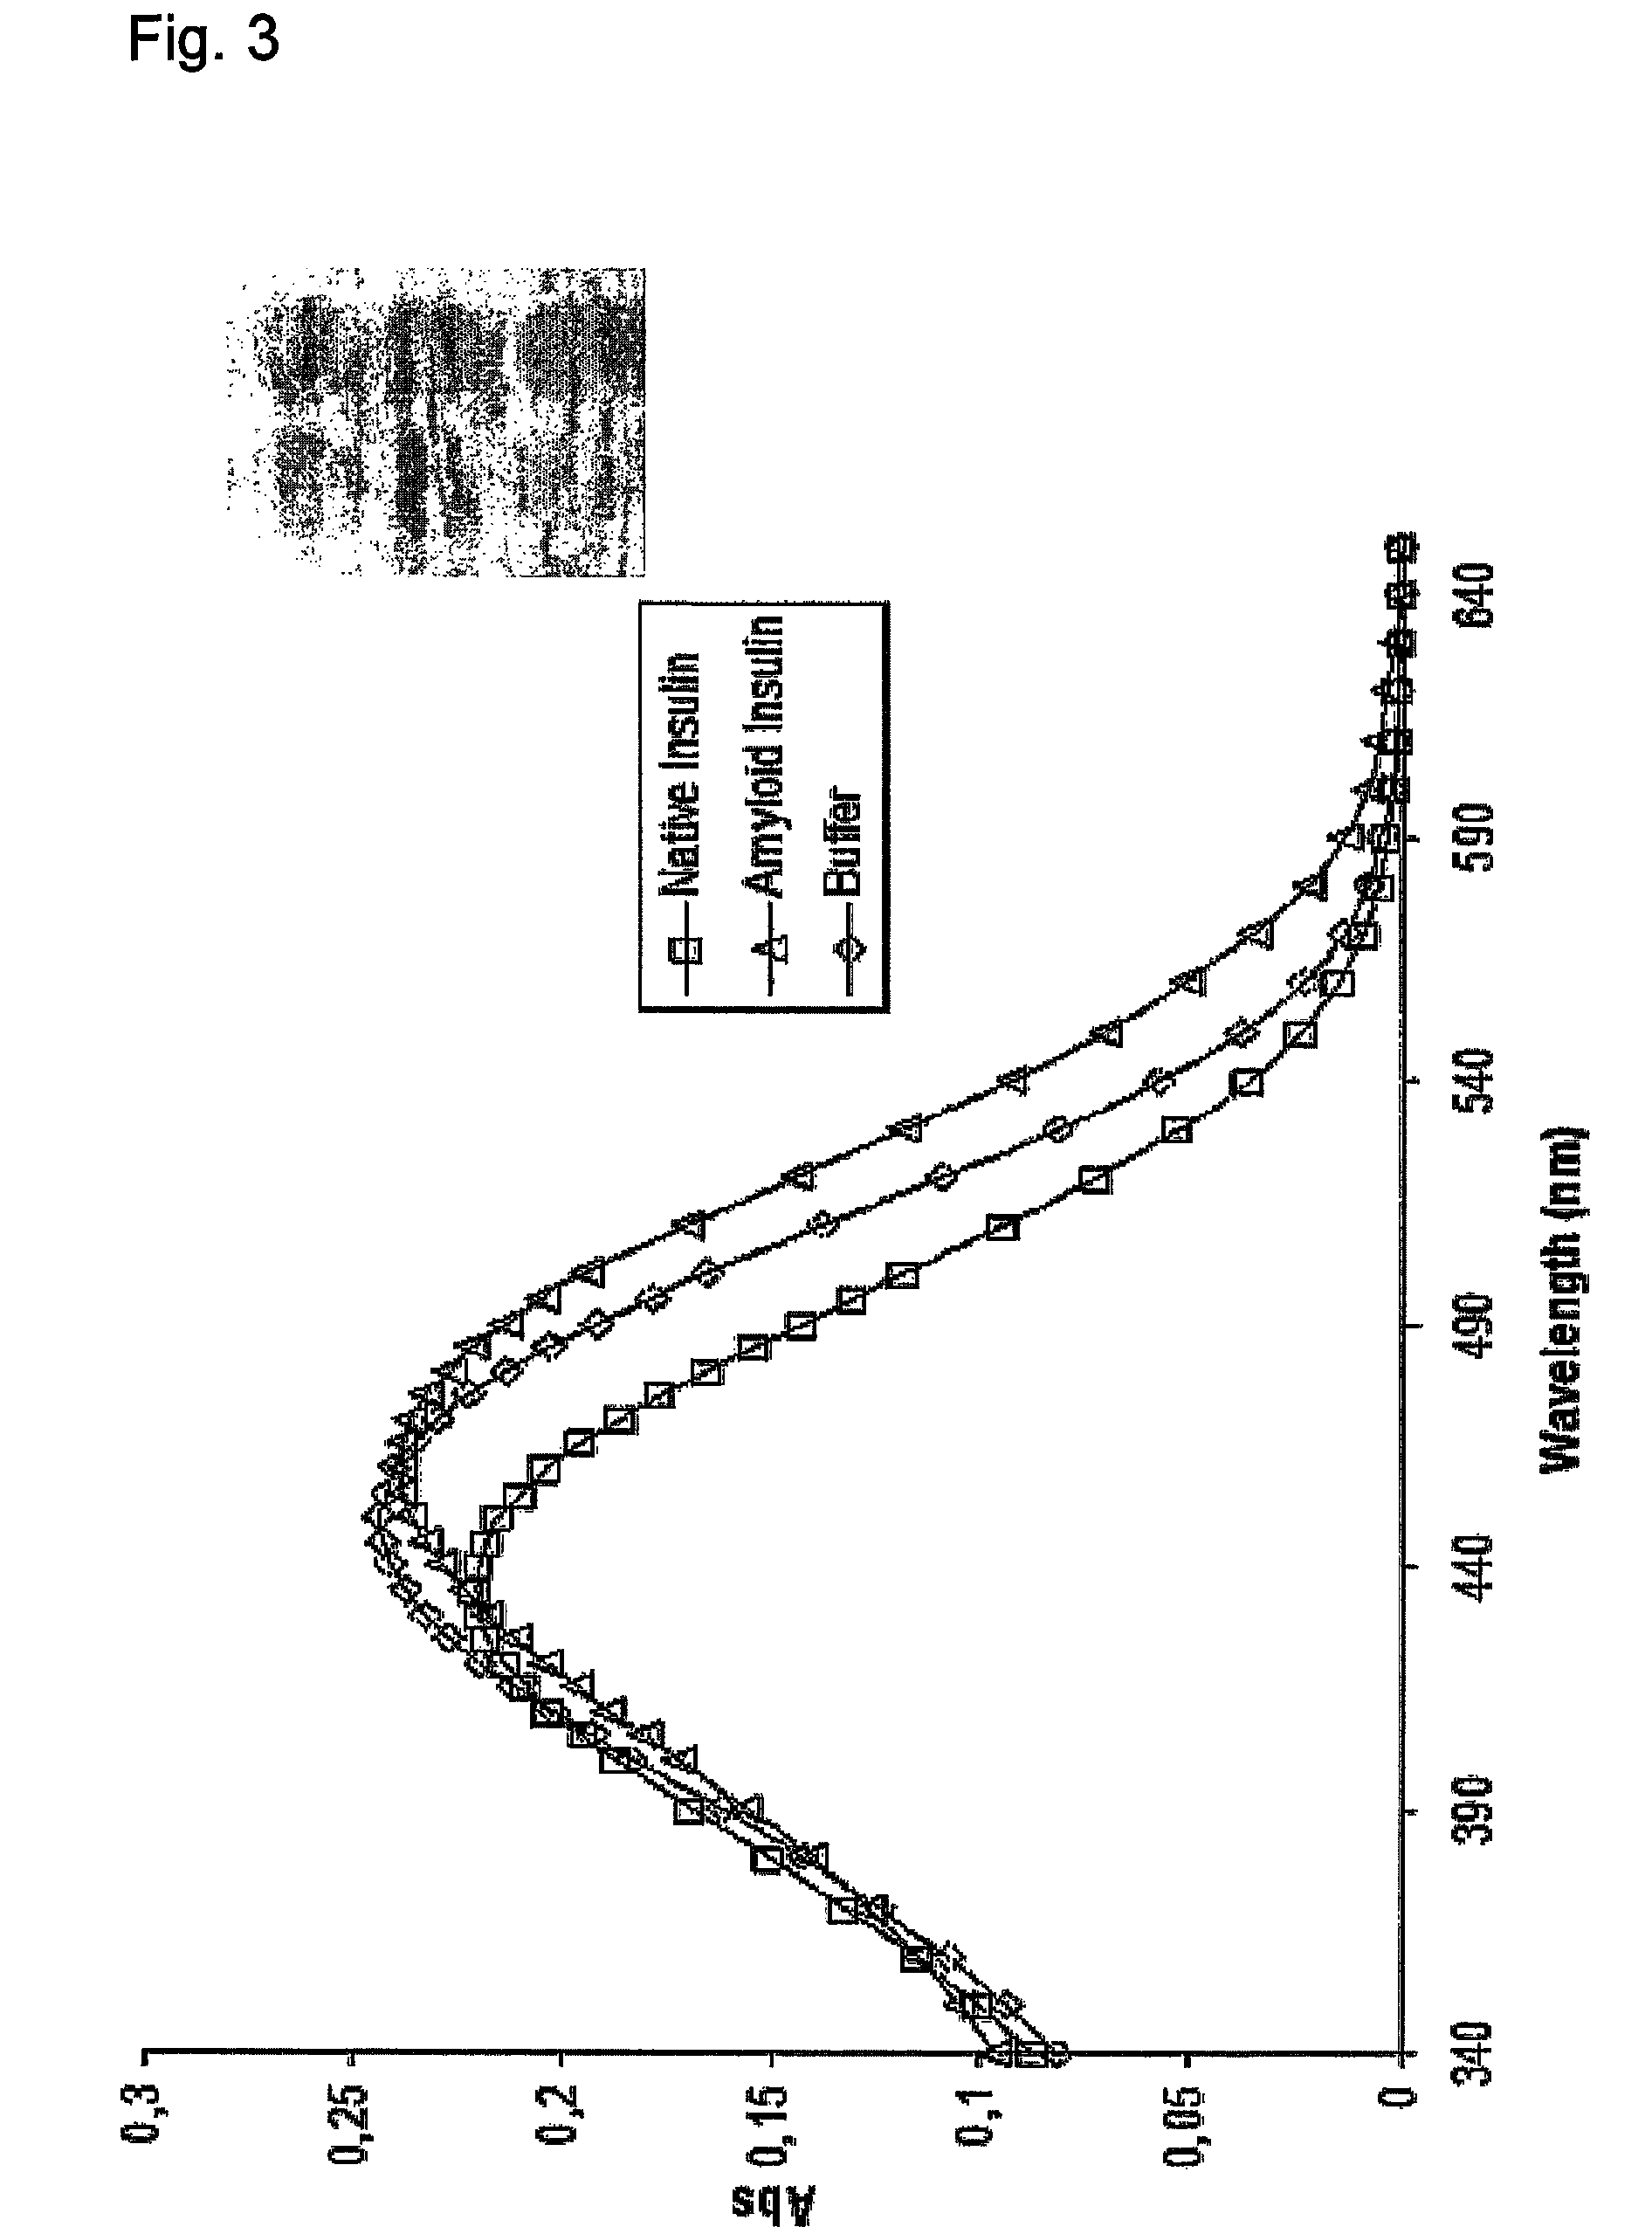 Methods for determining conformational changes and self-assembly of proteins